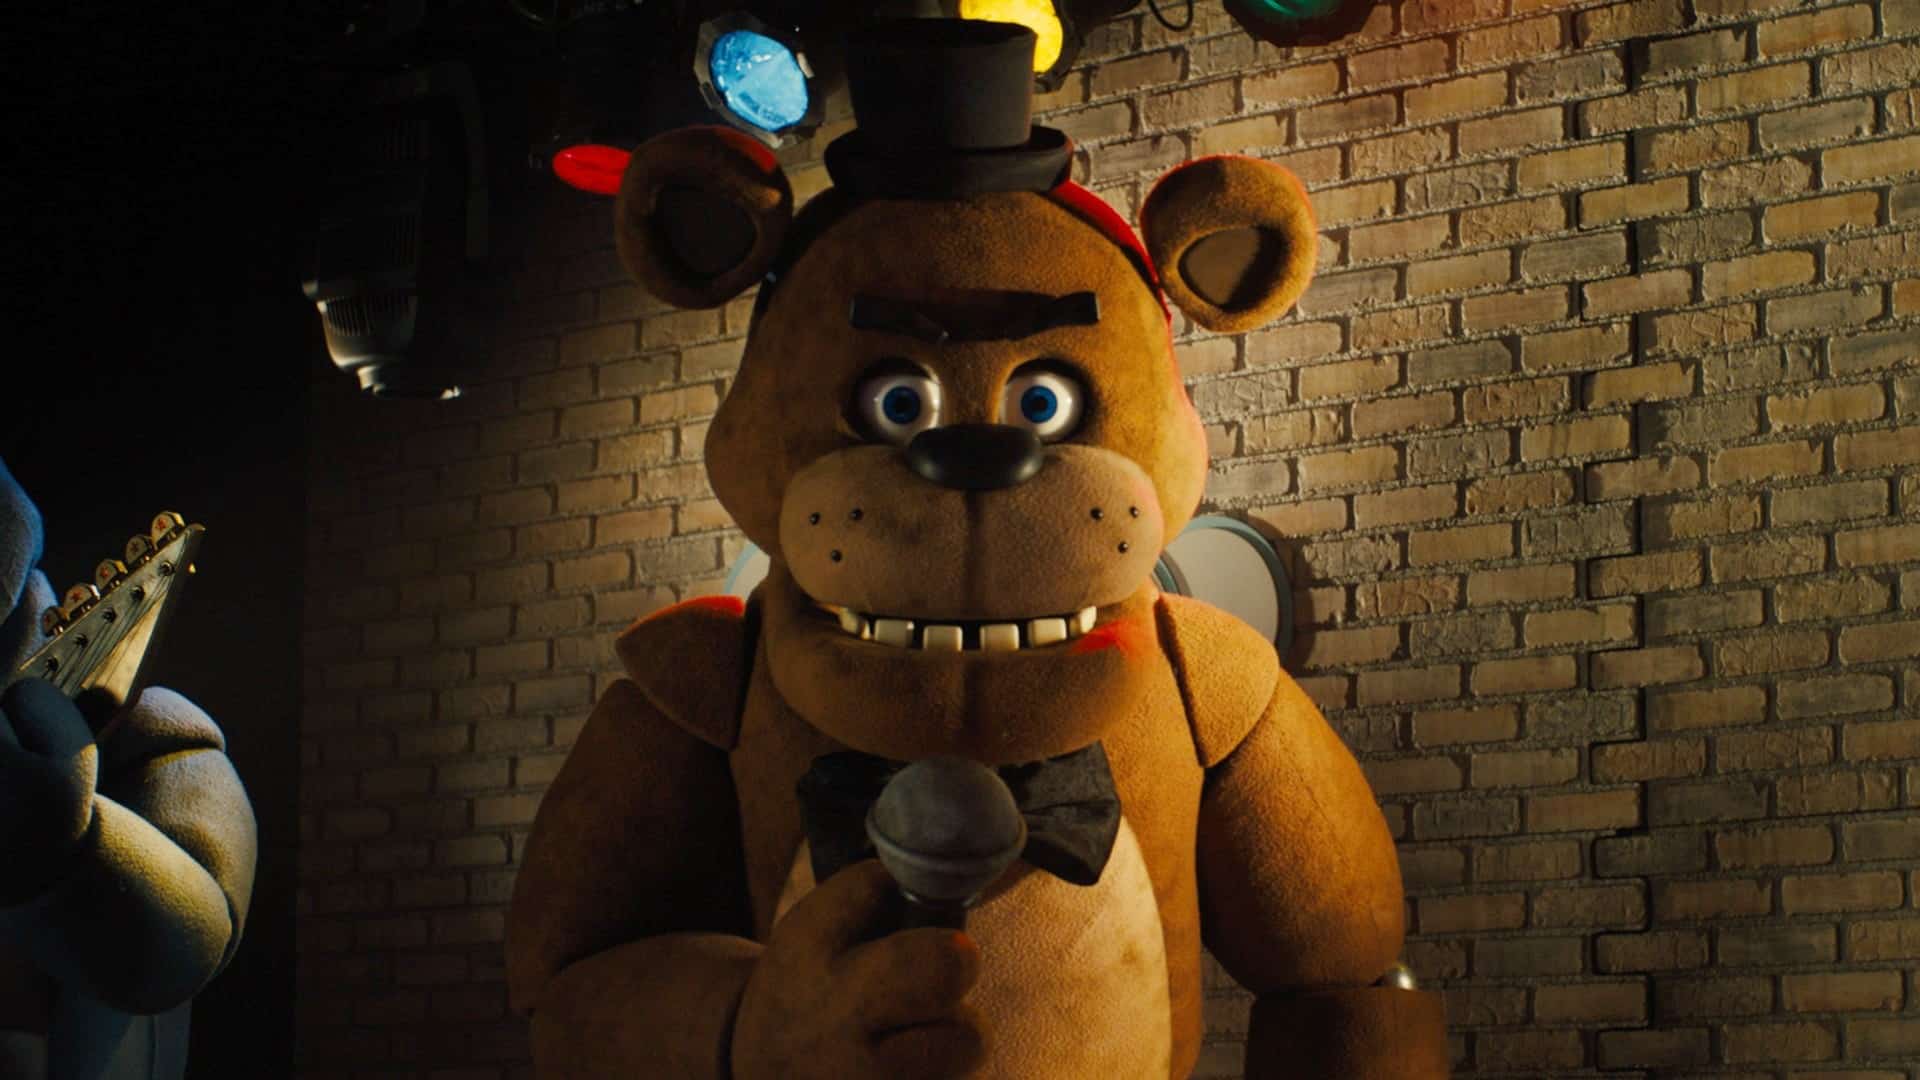 Five Nights at Freddy's' Just Made Box Office History Again